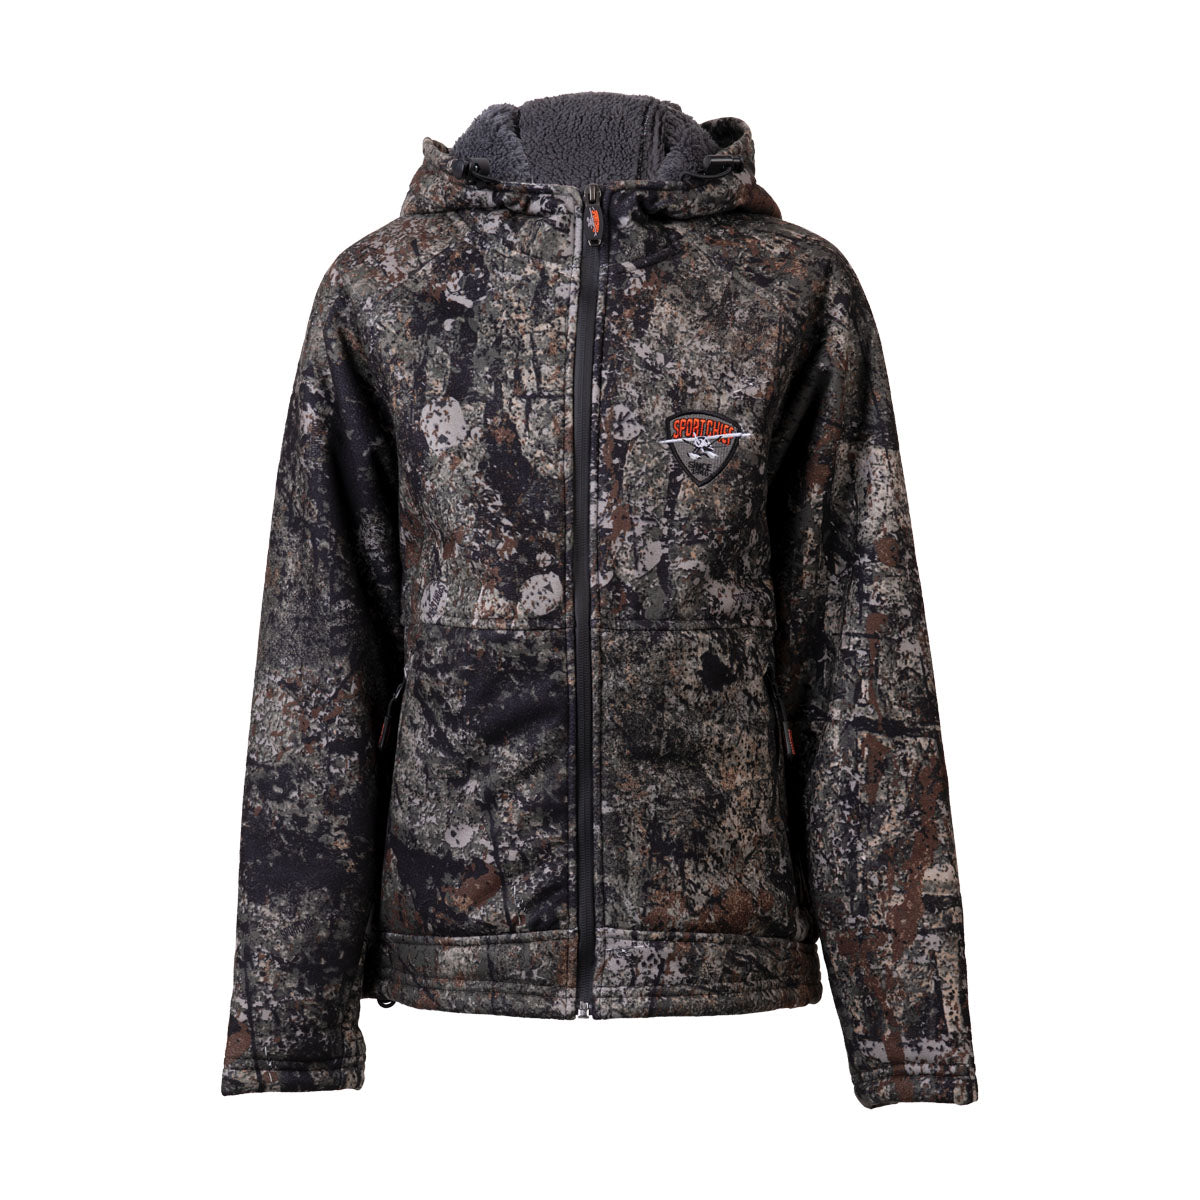 Hunting jacket for kids "Dynamo 2.0" camo the Ripper